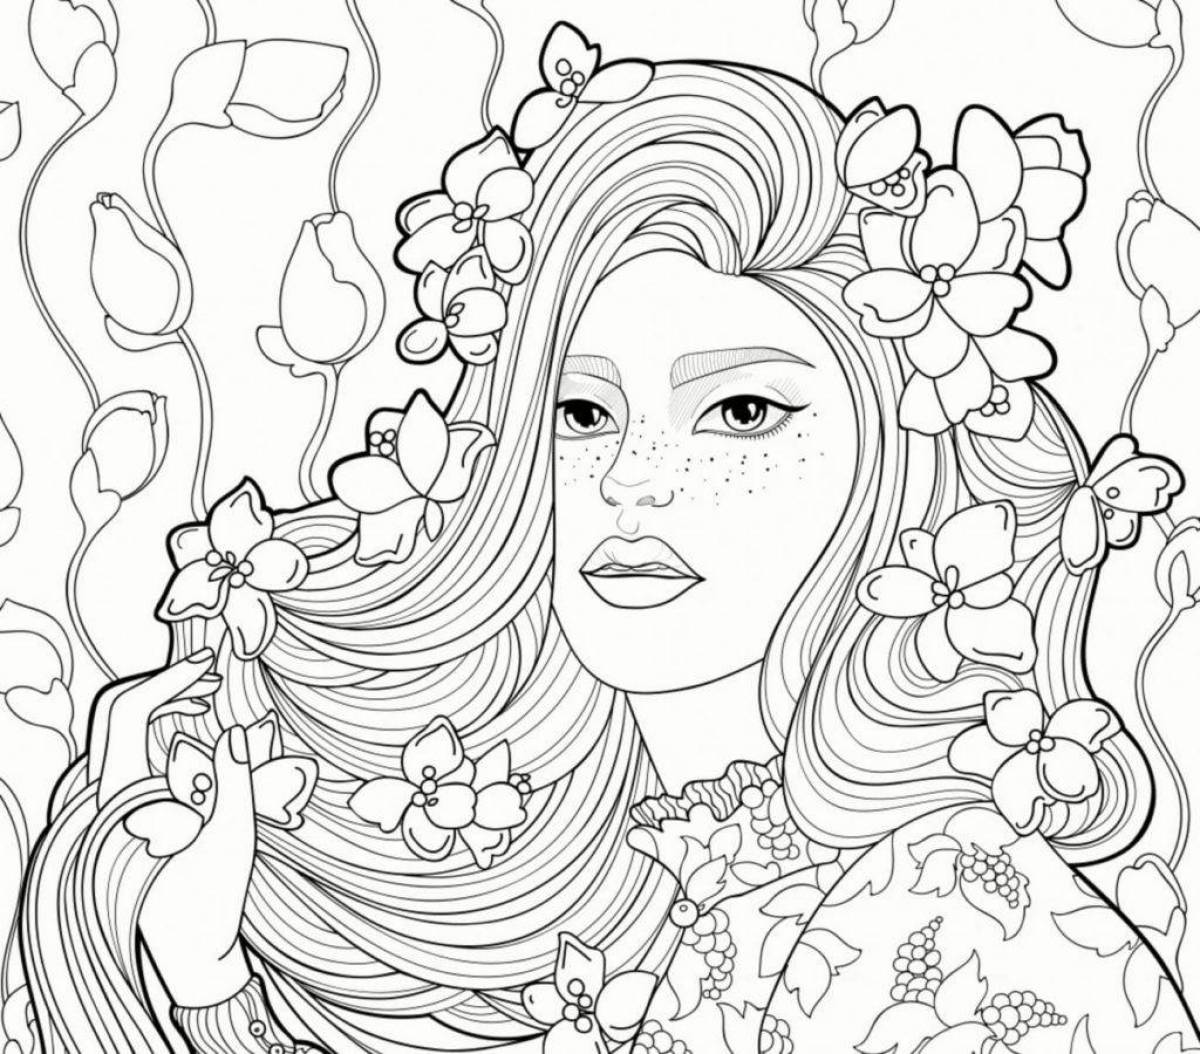 Fairytale coloring very beautiful for girls